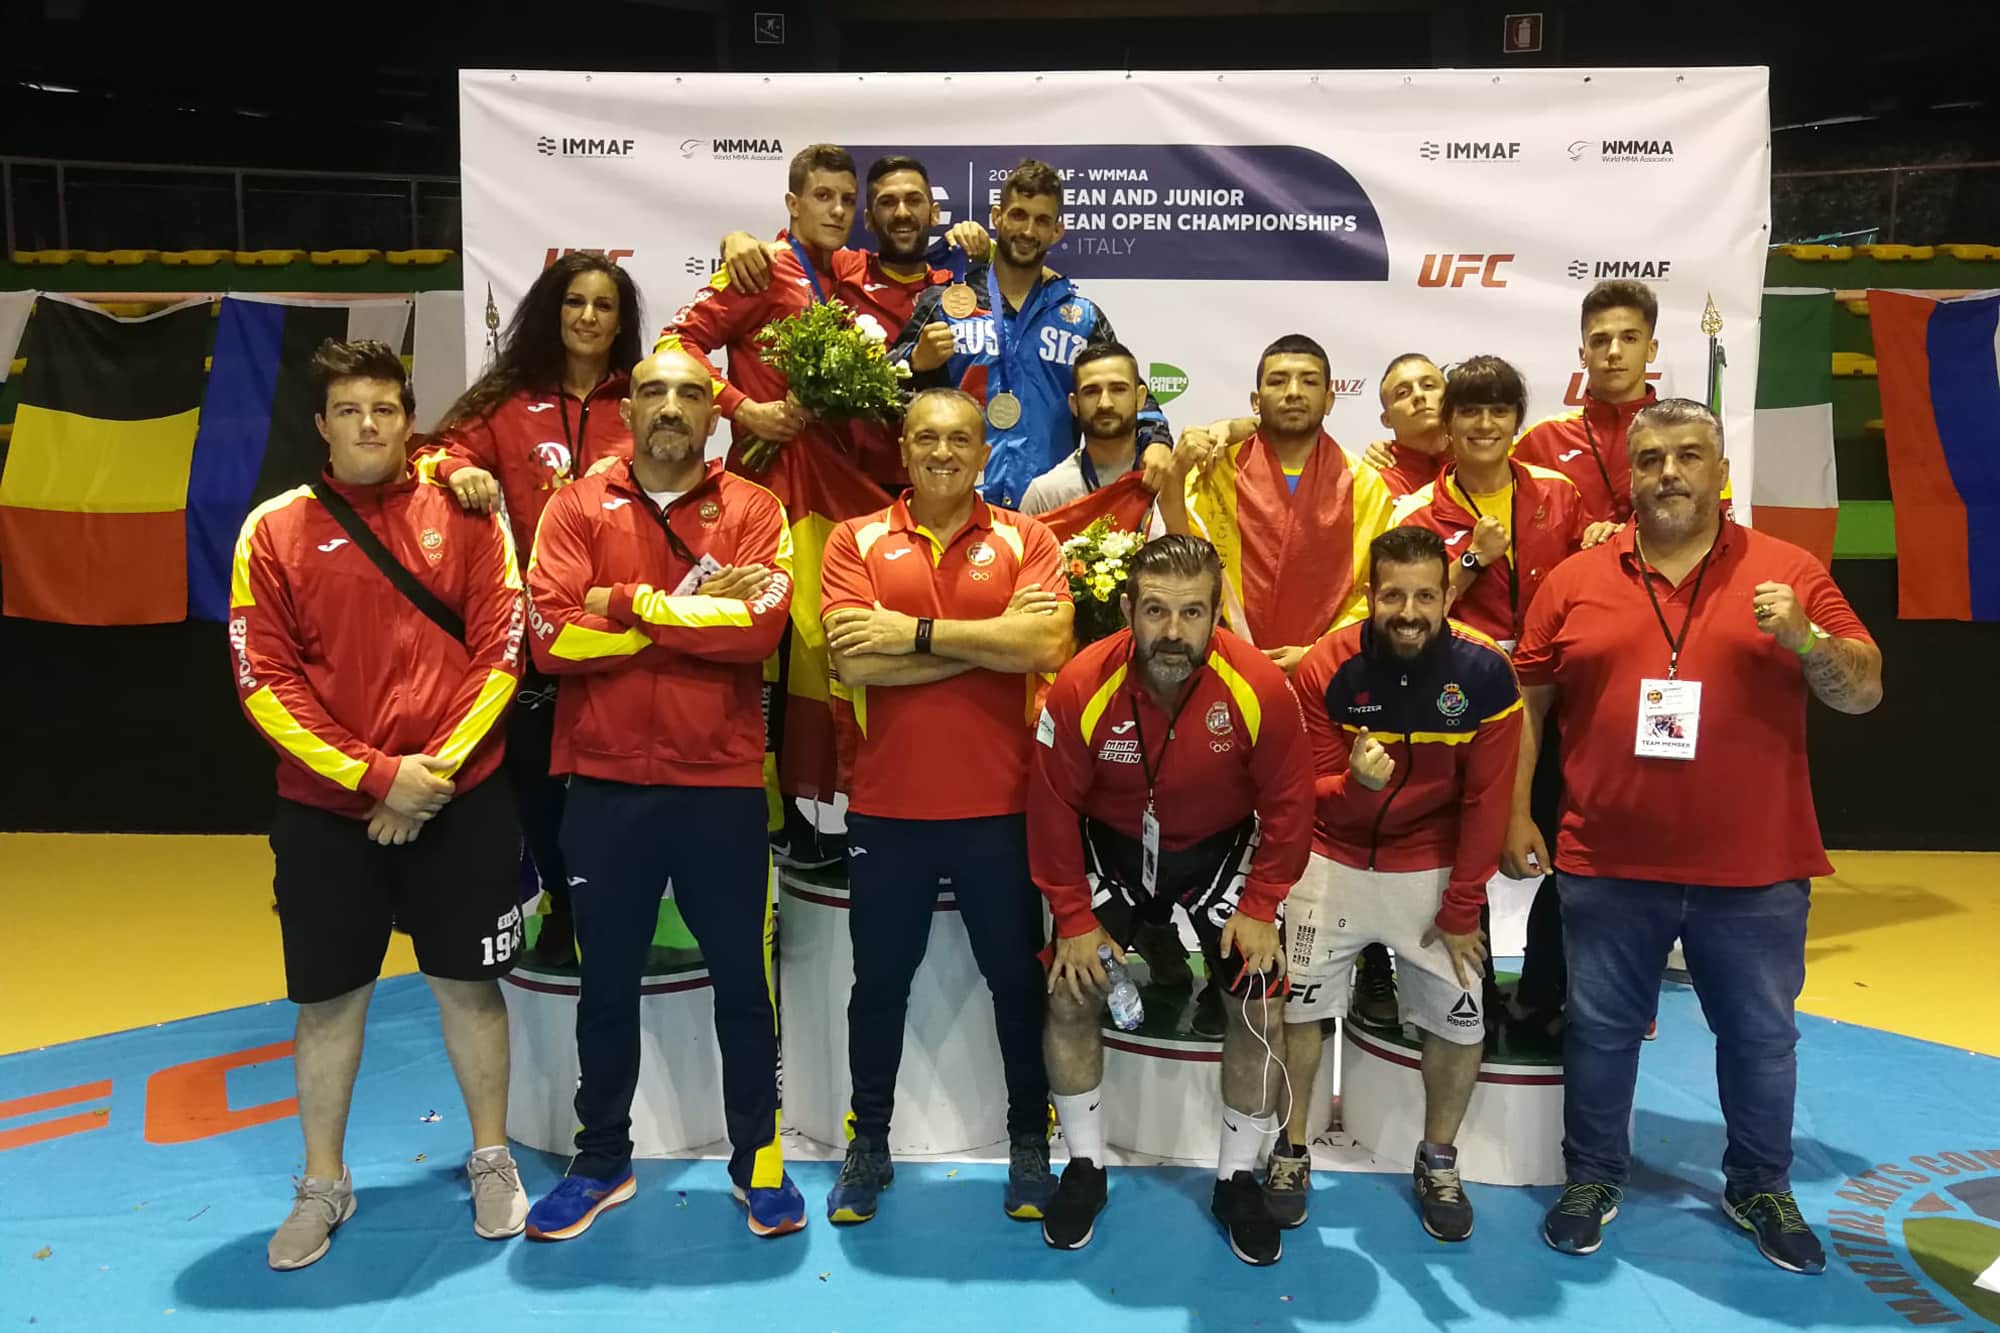 Spain boasts fastest take-up of IMMAF Grading App among MMA coaches & students